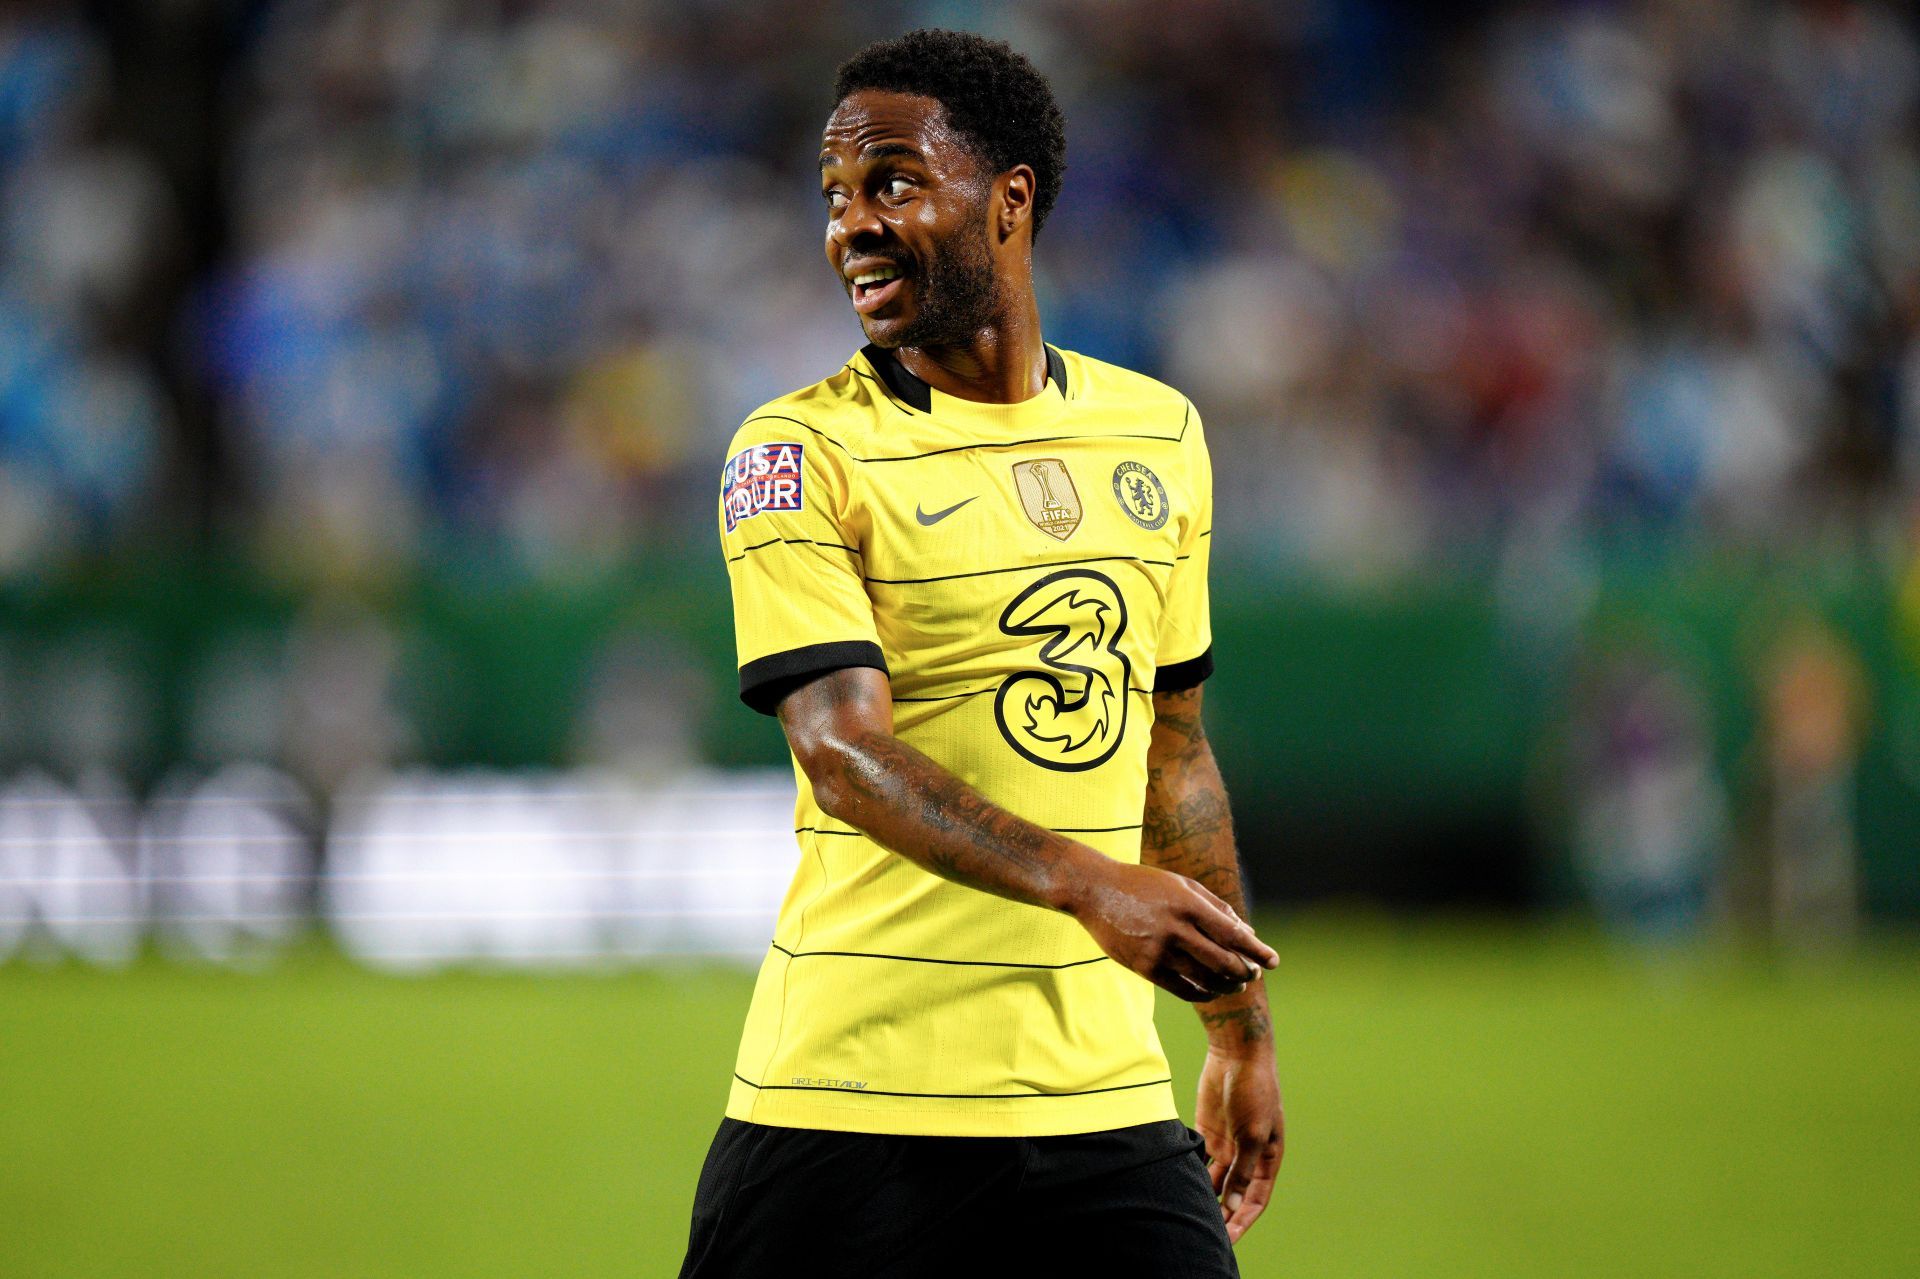 Raheem Sterling is expected to hit the ground running under Thomas Tuchel.